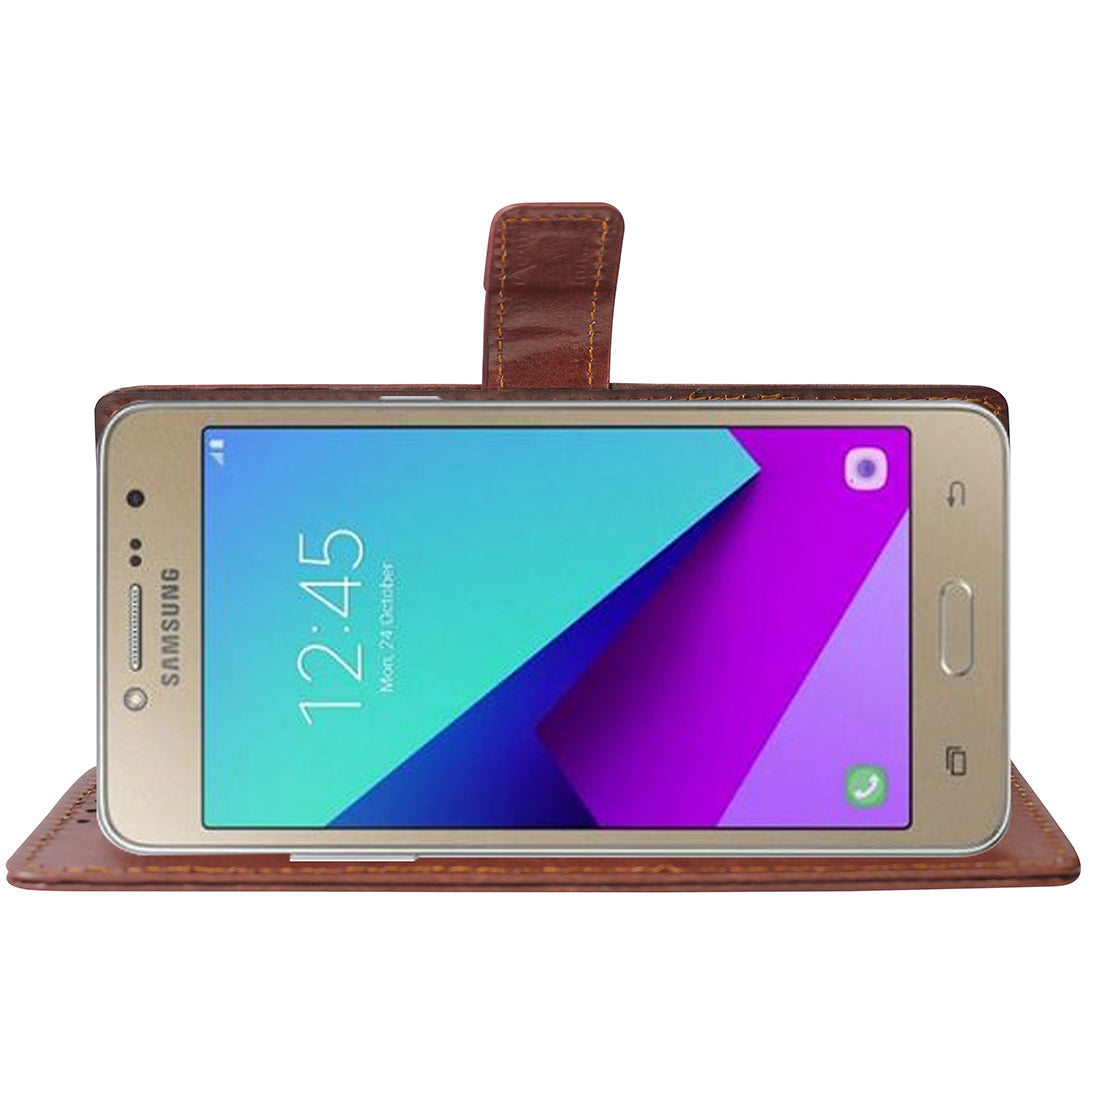 Premium Wallet Flip Cover for Samsung Galaxy J2 Ace